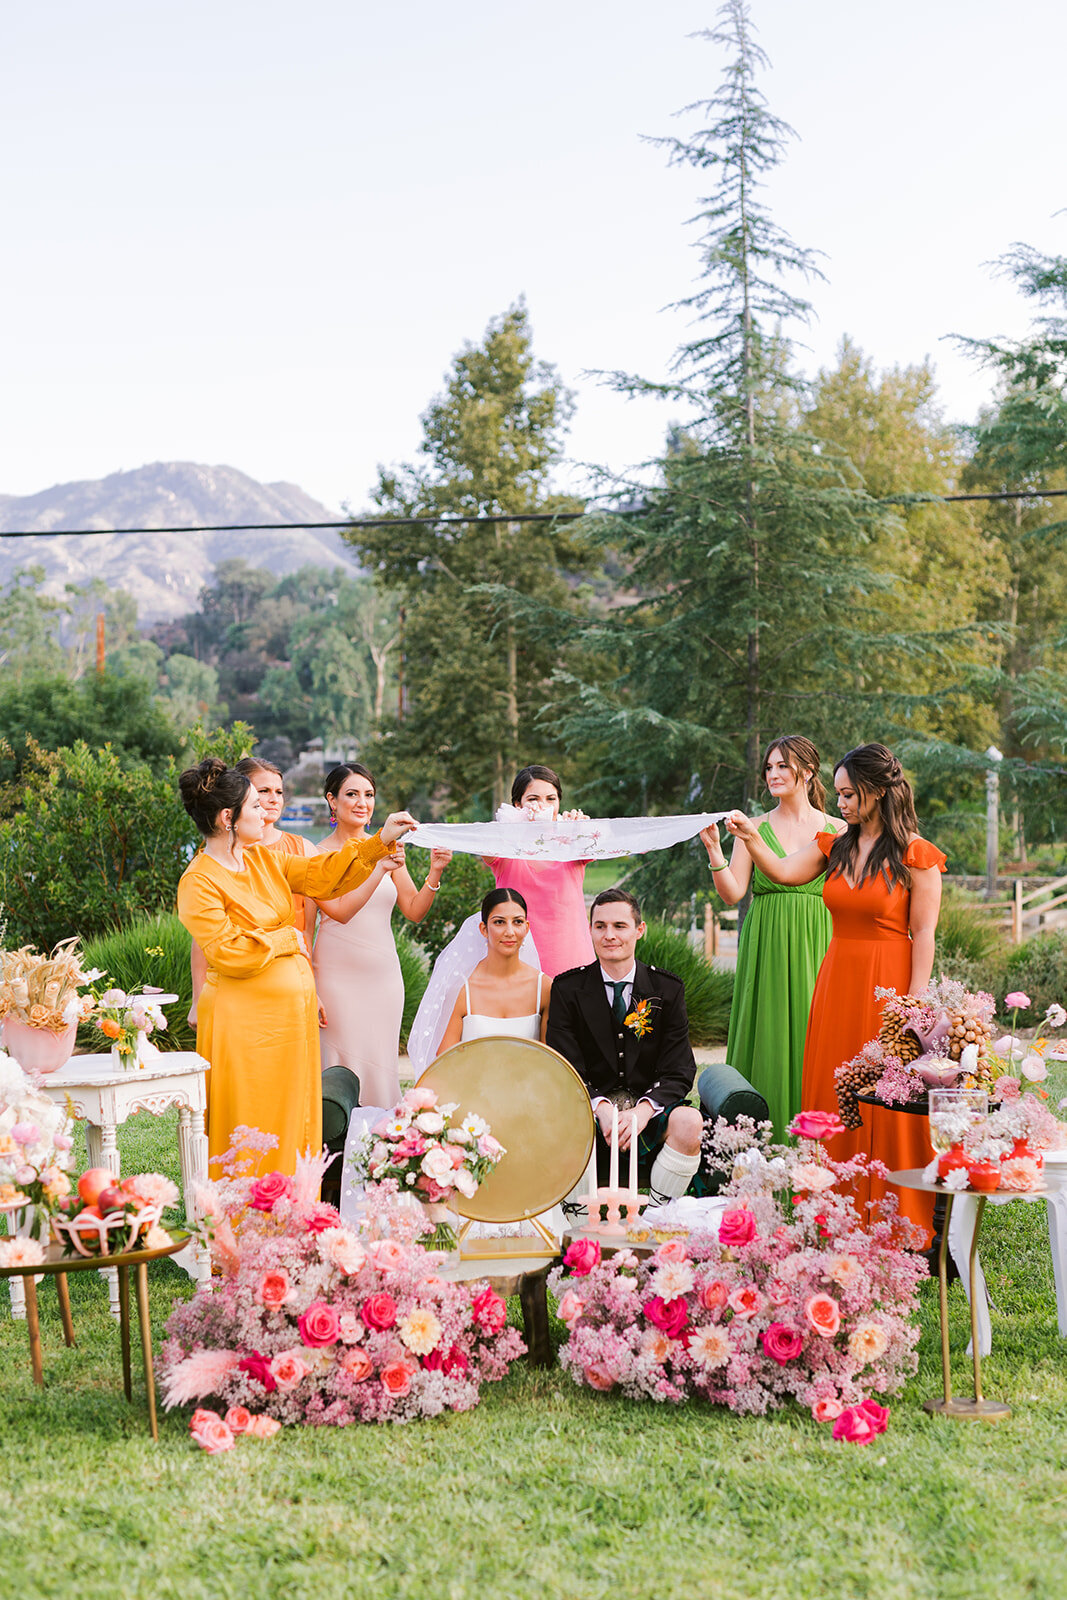 Angelica Marie Photography_Natalie Pirzad and Gordon Stewart Wedding_September 2022_The Lodge at Malibou Lake Wedding_Malibu Wedding Photographer_1167